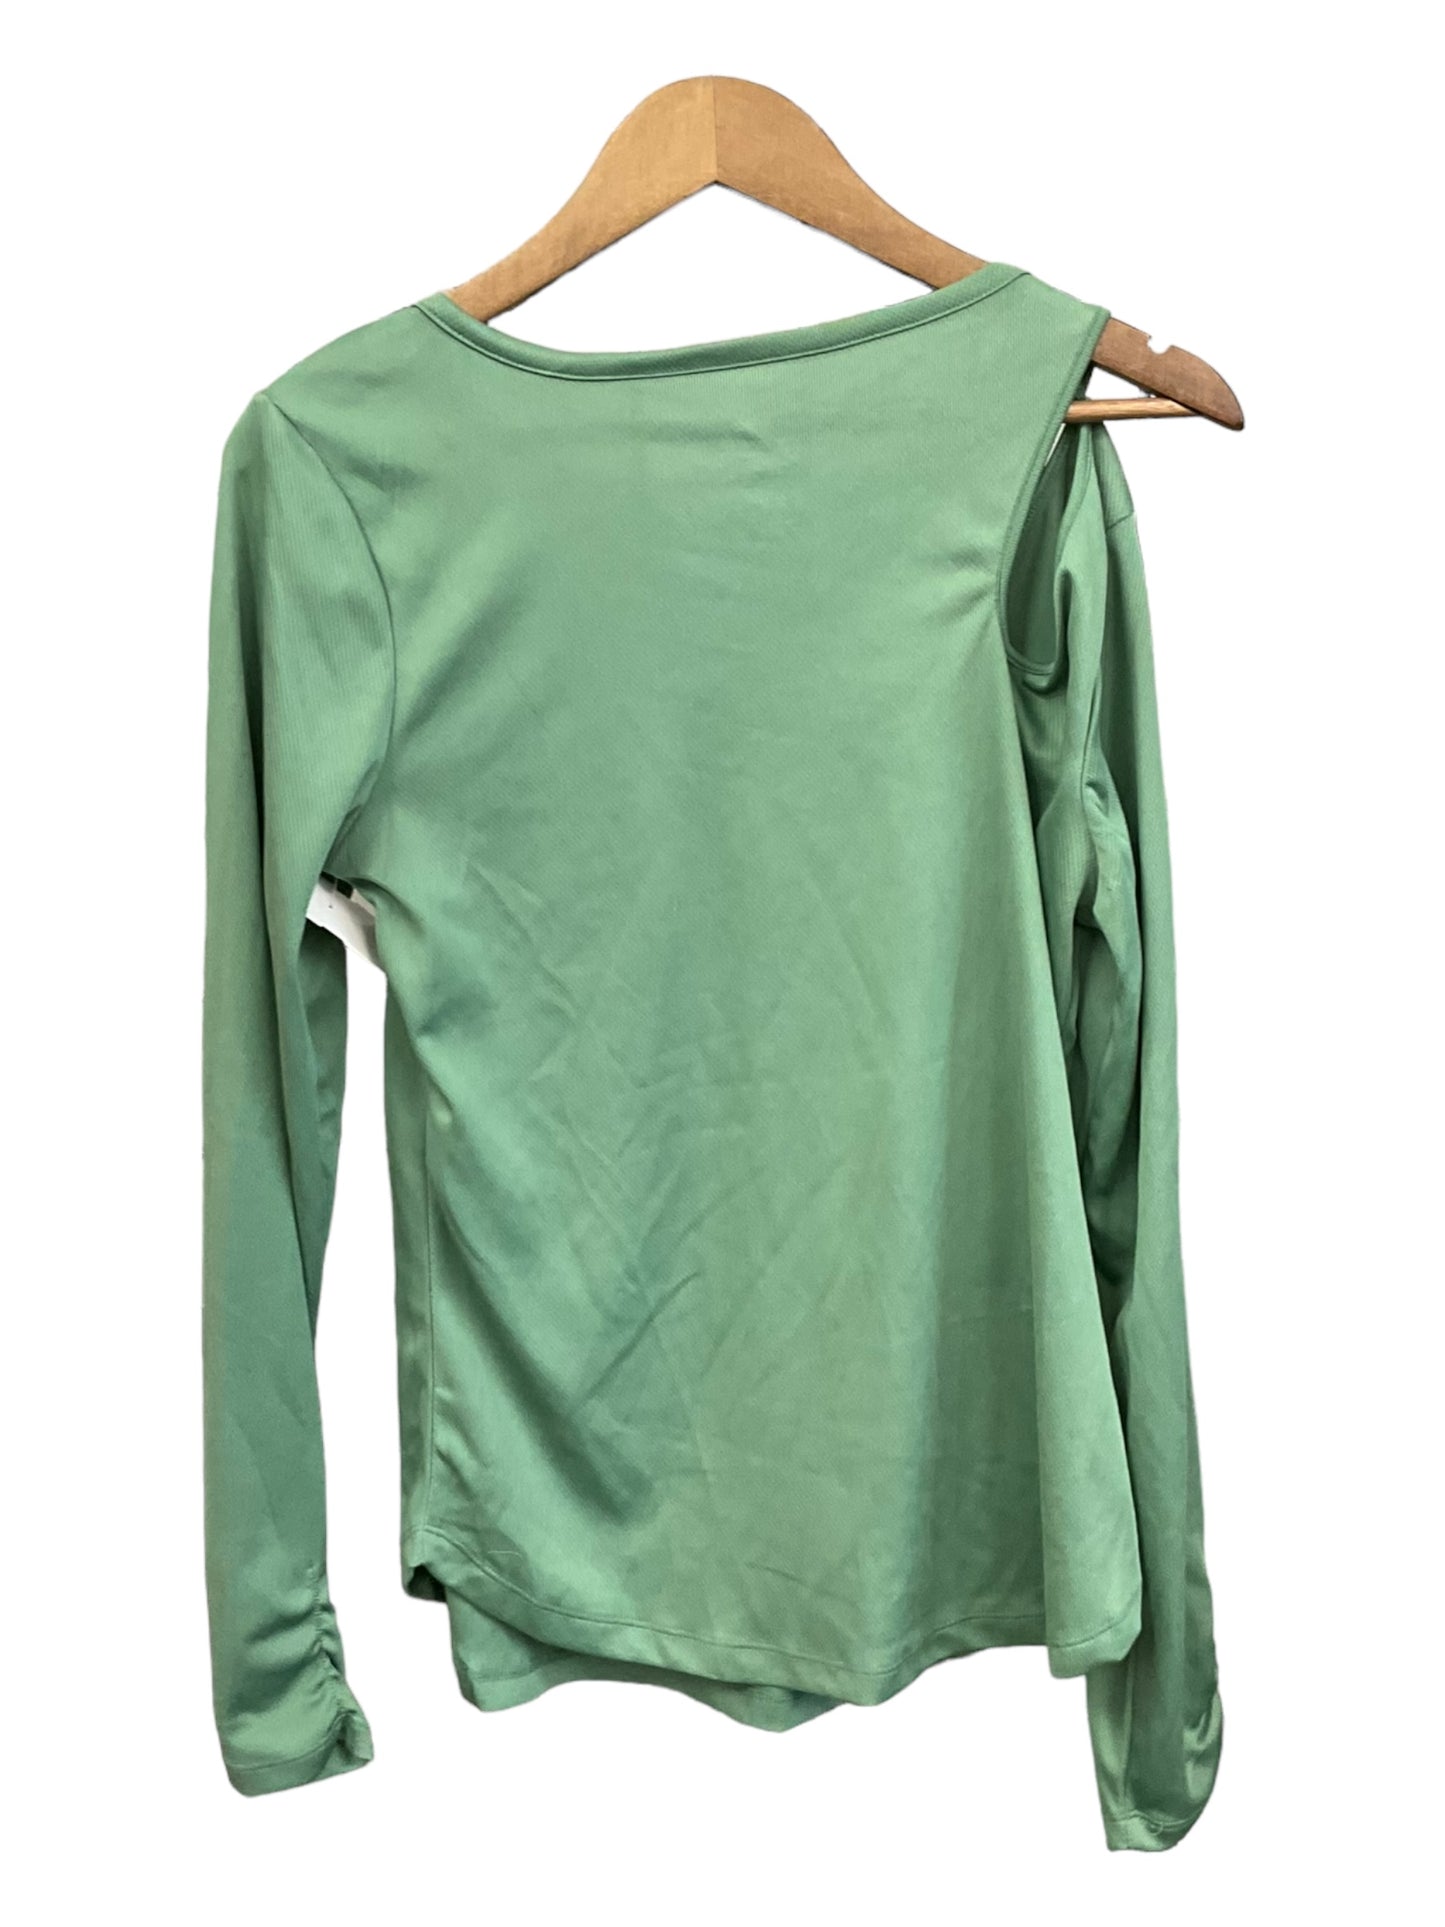 Athletic Top Long Sleeve Collar By Pro Player  Size: M